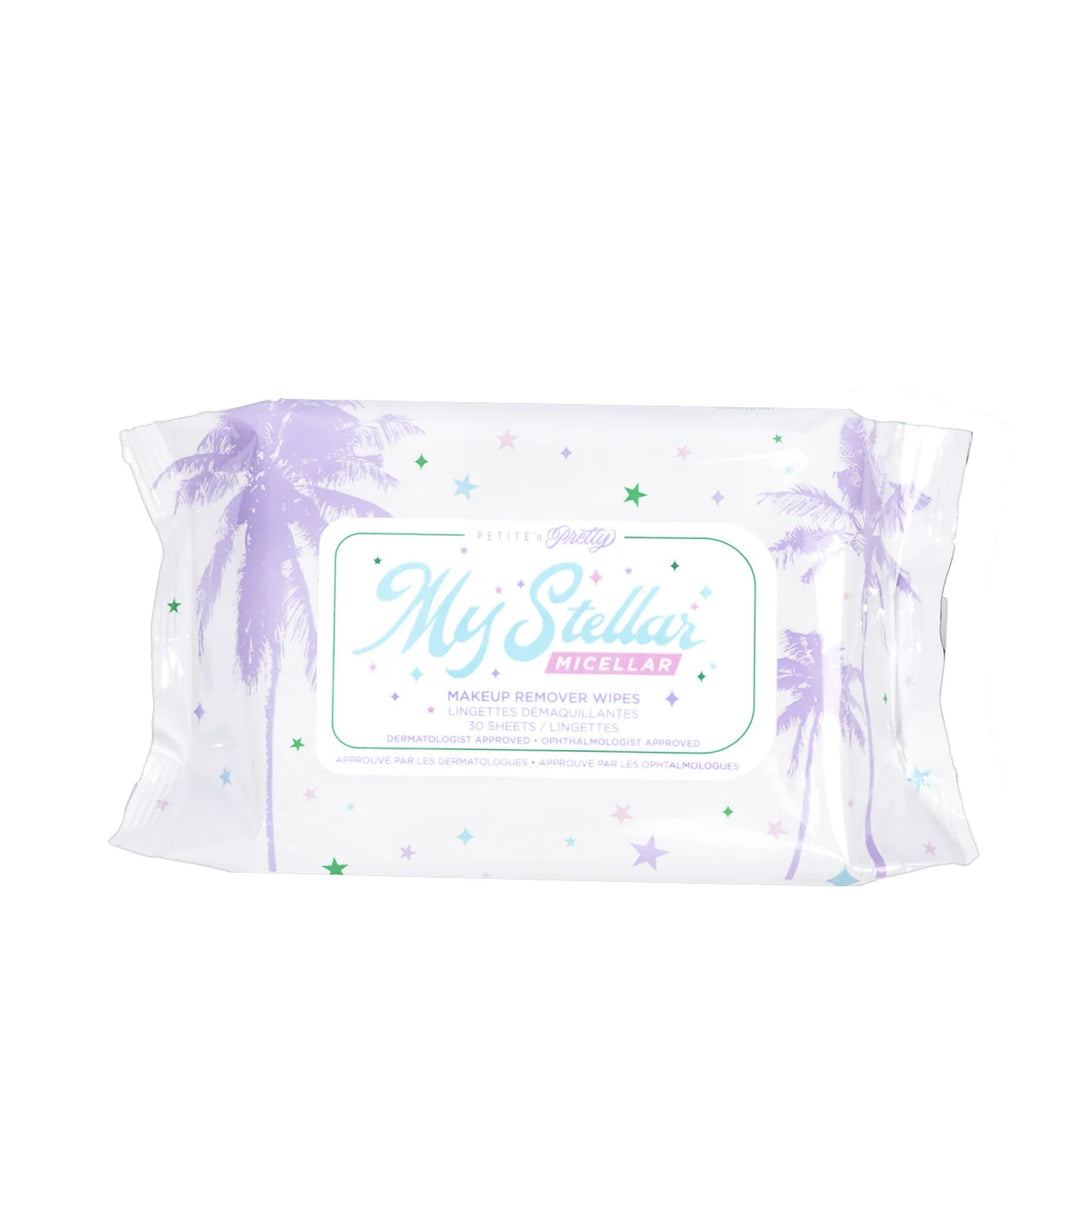 Petite and Pretty My Stellar Micellar Makeup Remover Wipes